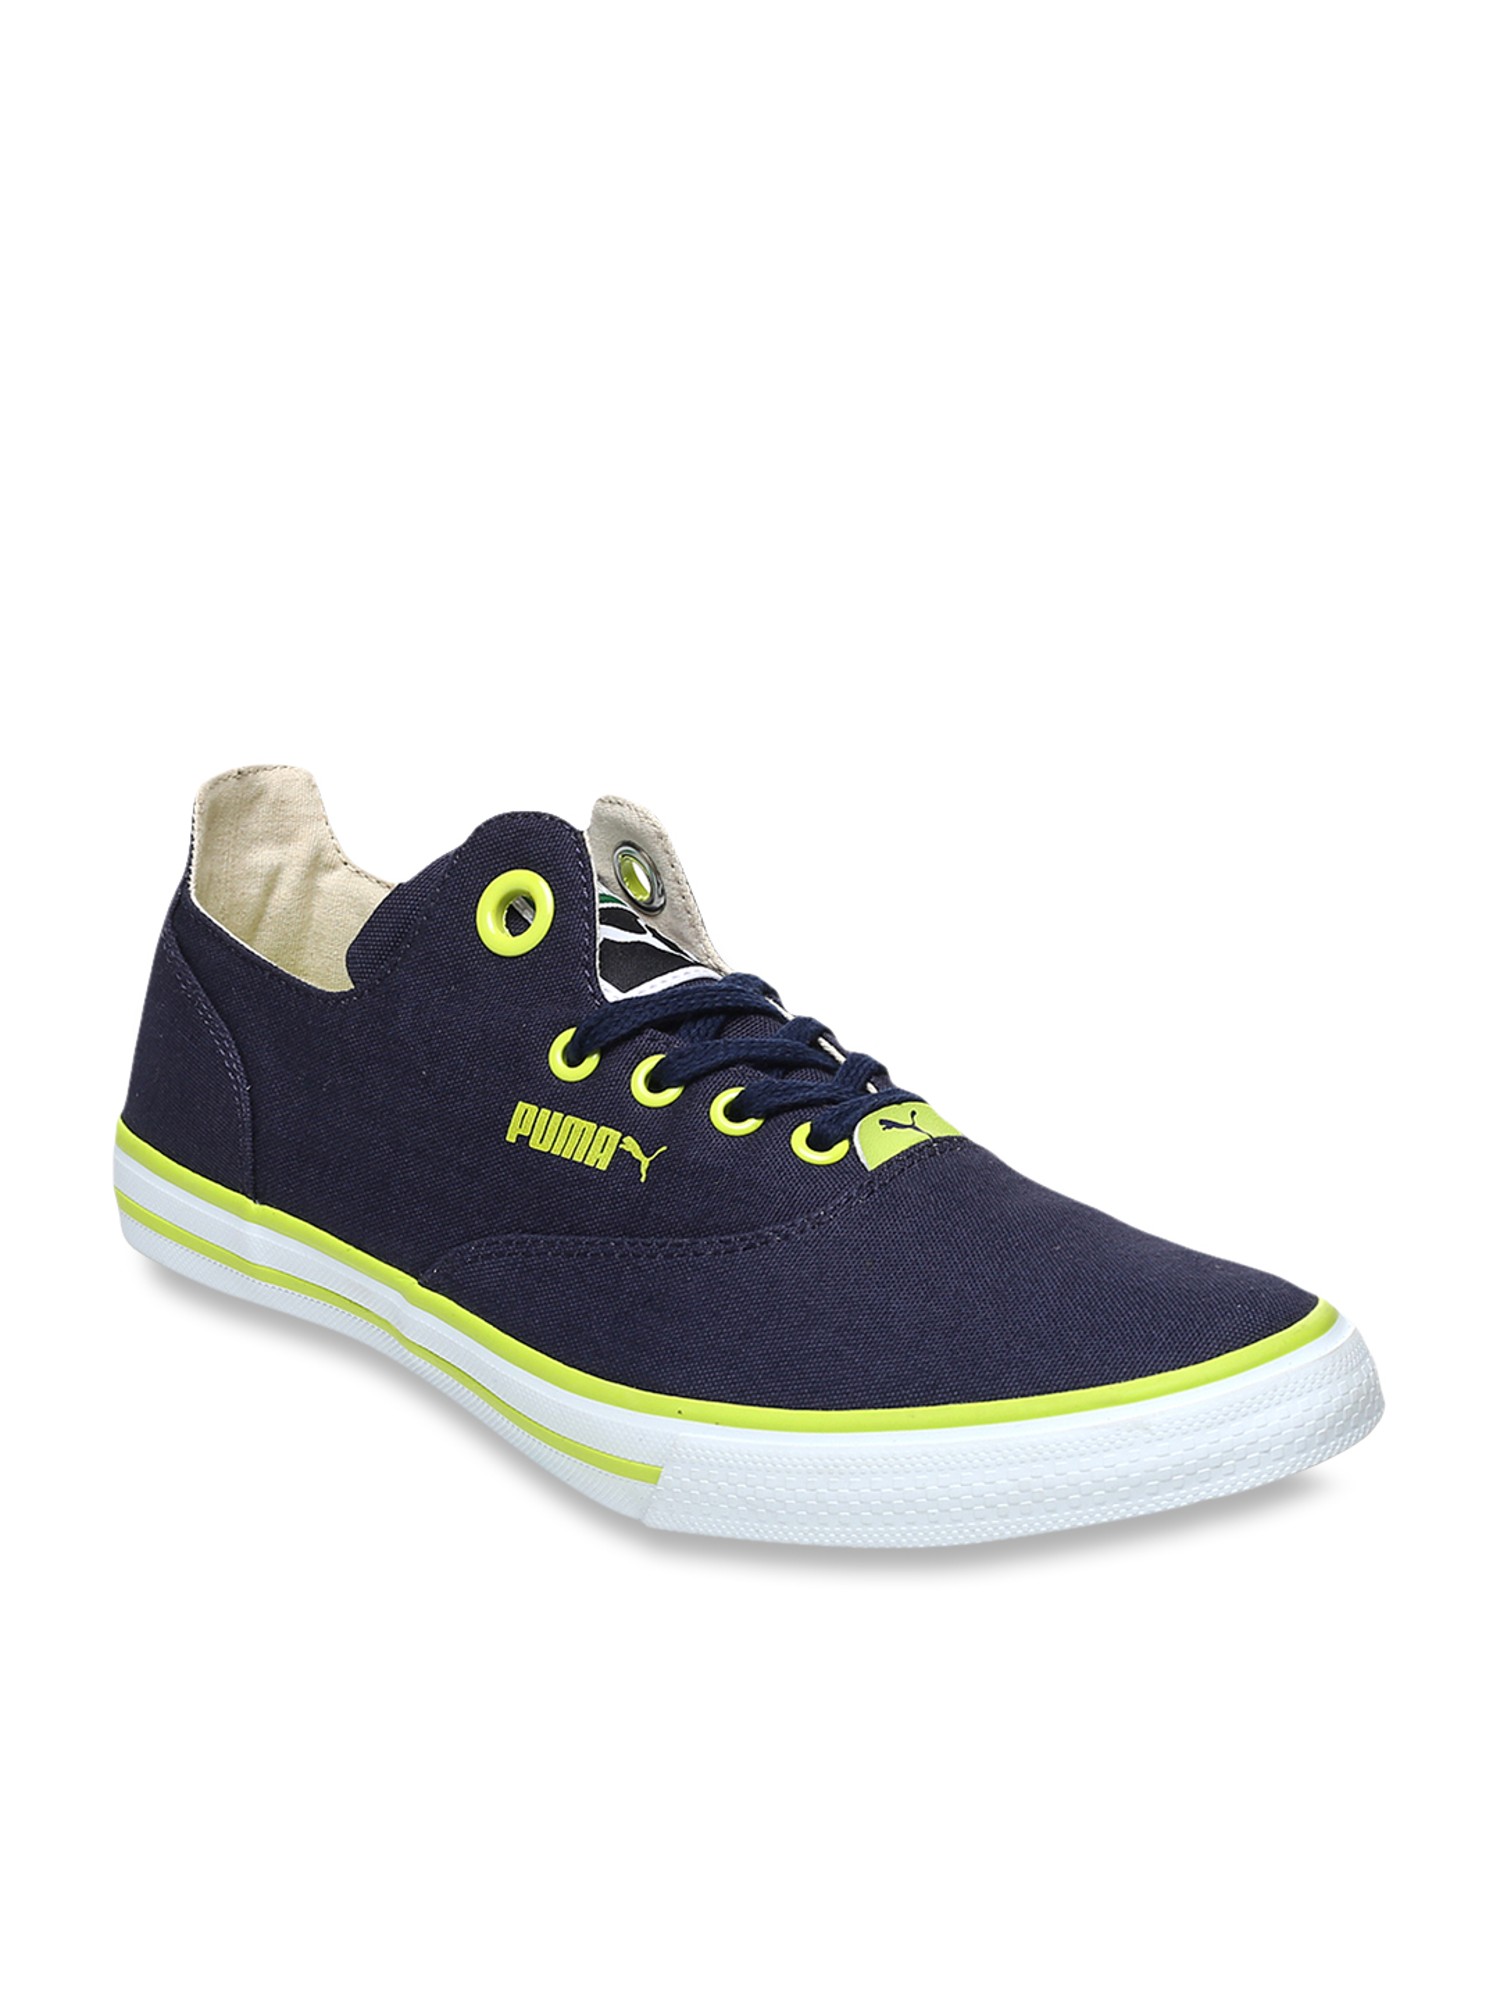 puma limnos cat ind sneakers price